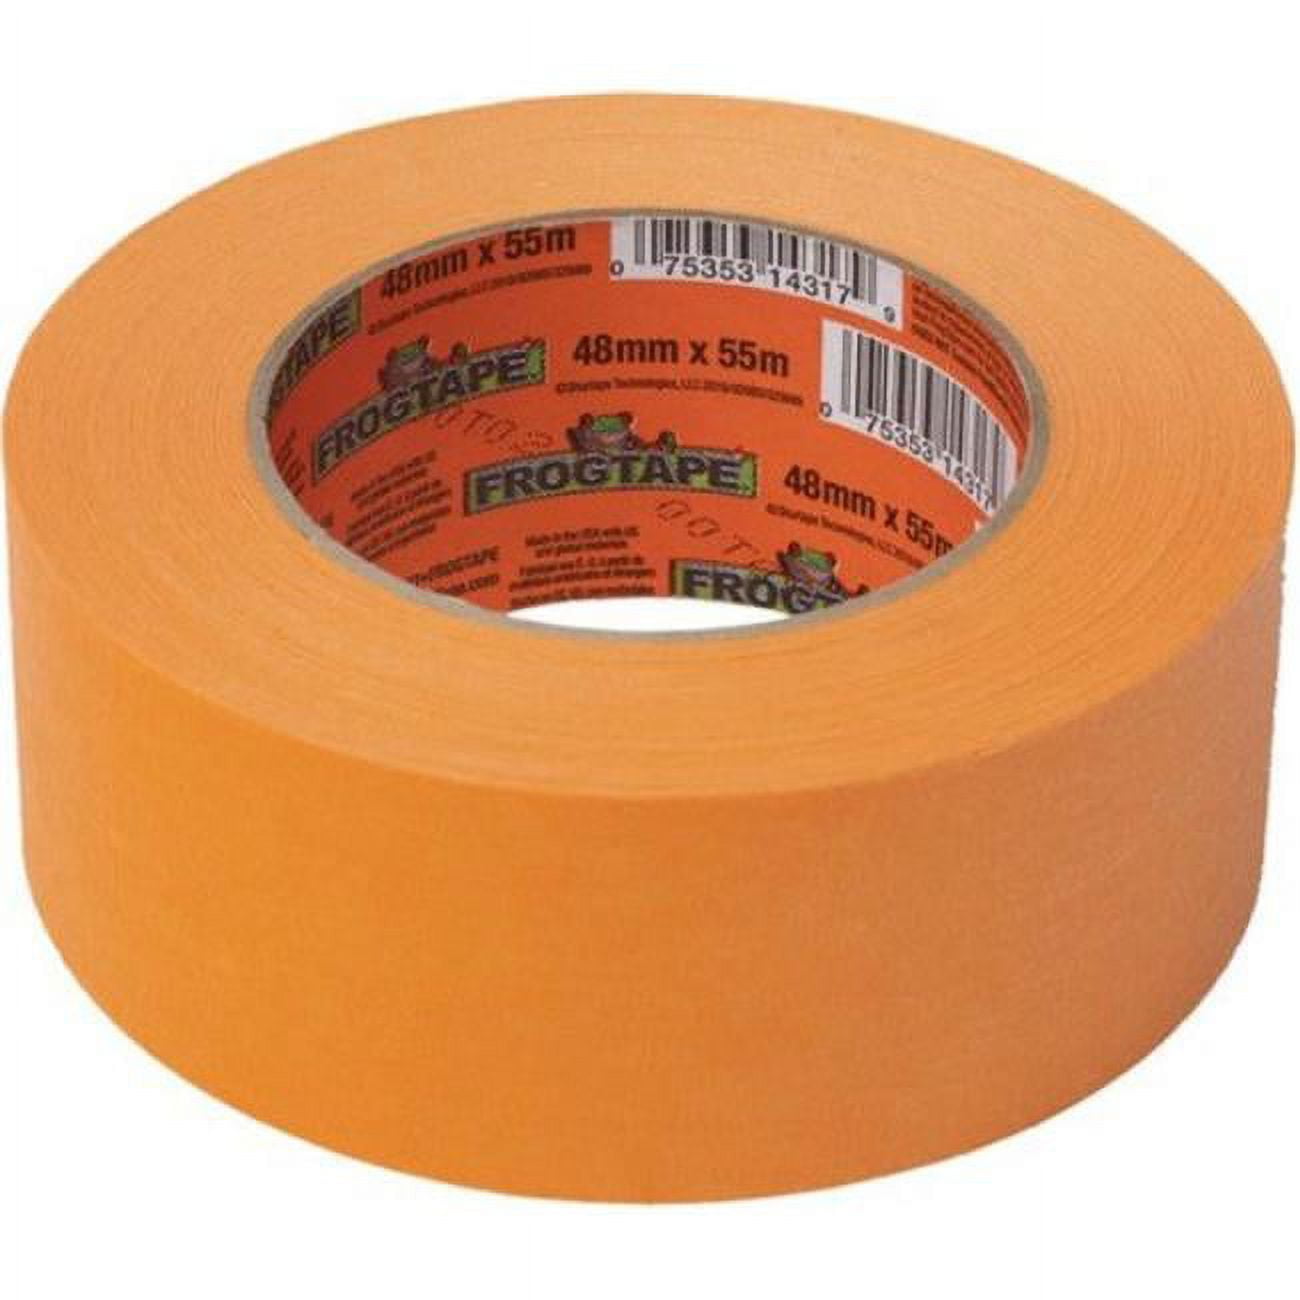 Shurtape® 8-Day Painters Mate Green® Painter's Tape, Multi-Surface,  48mmx55m - Case of 24